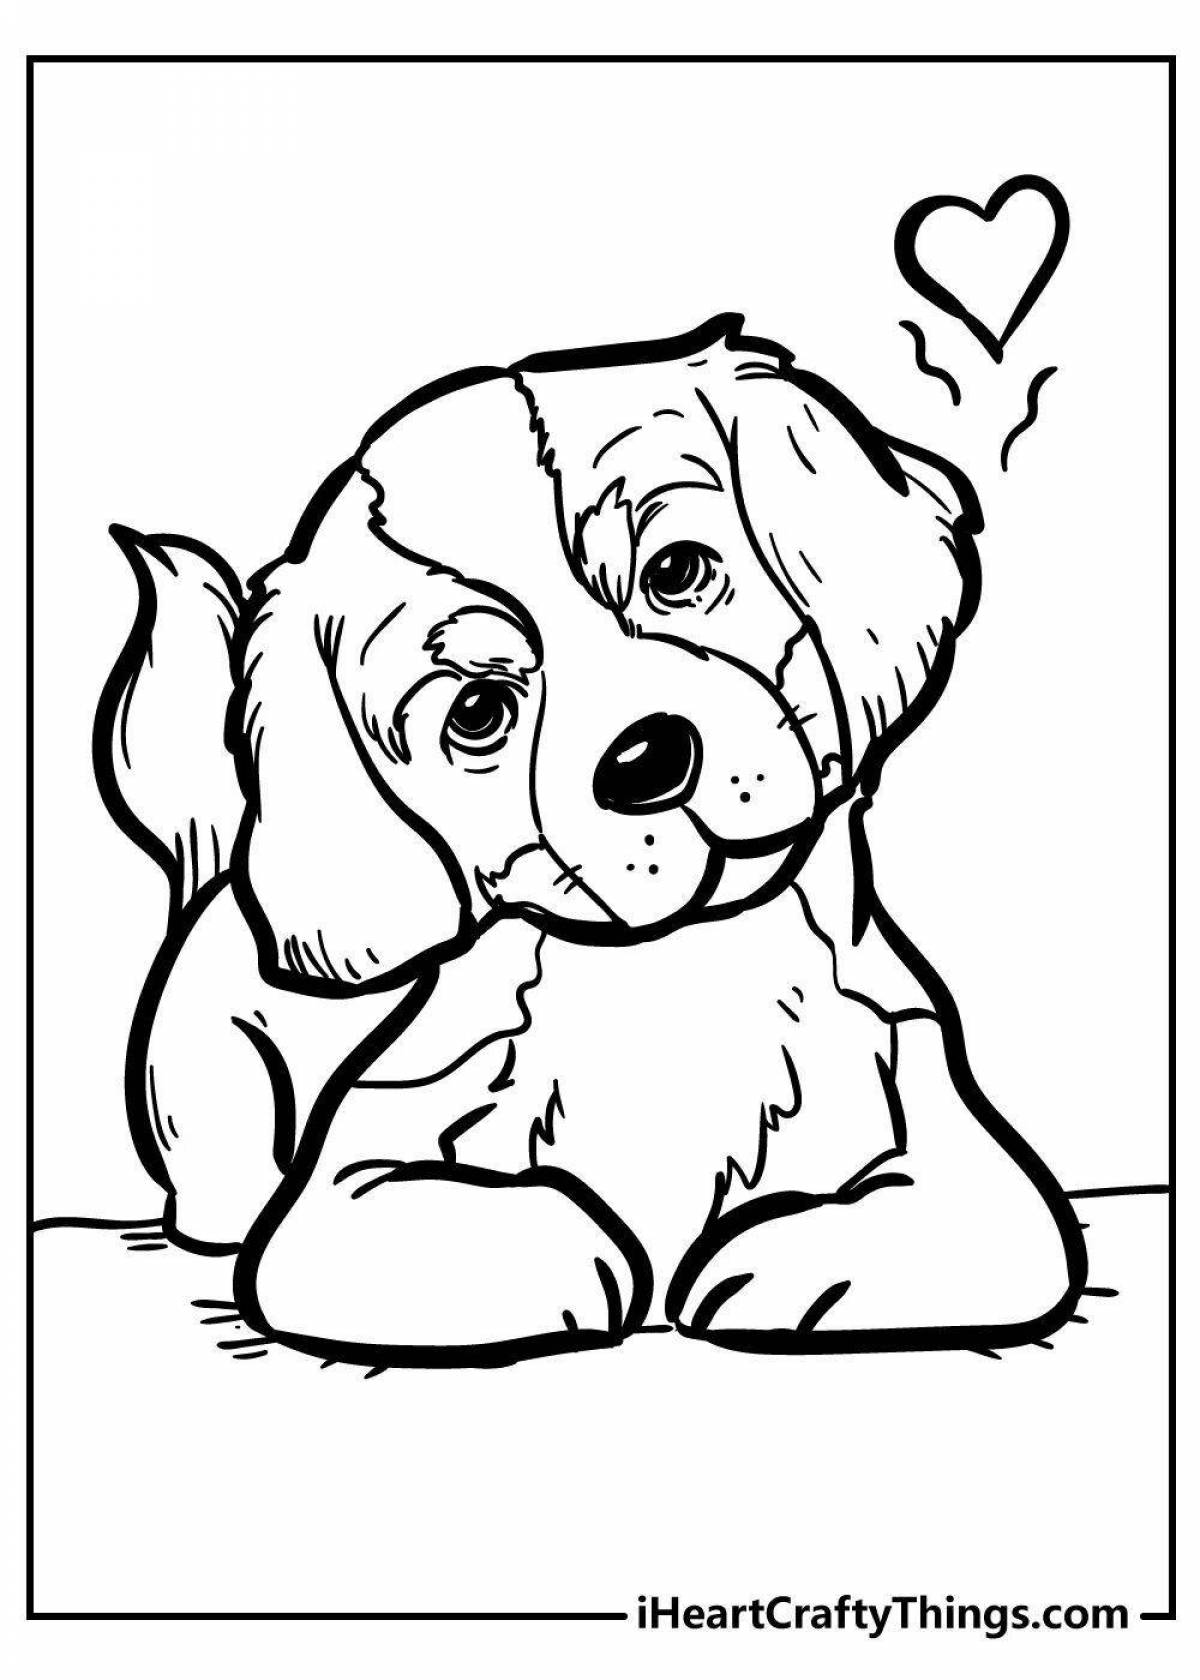 Playful dog coloring book for children 6-7 years old